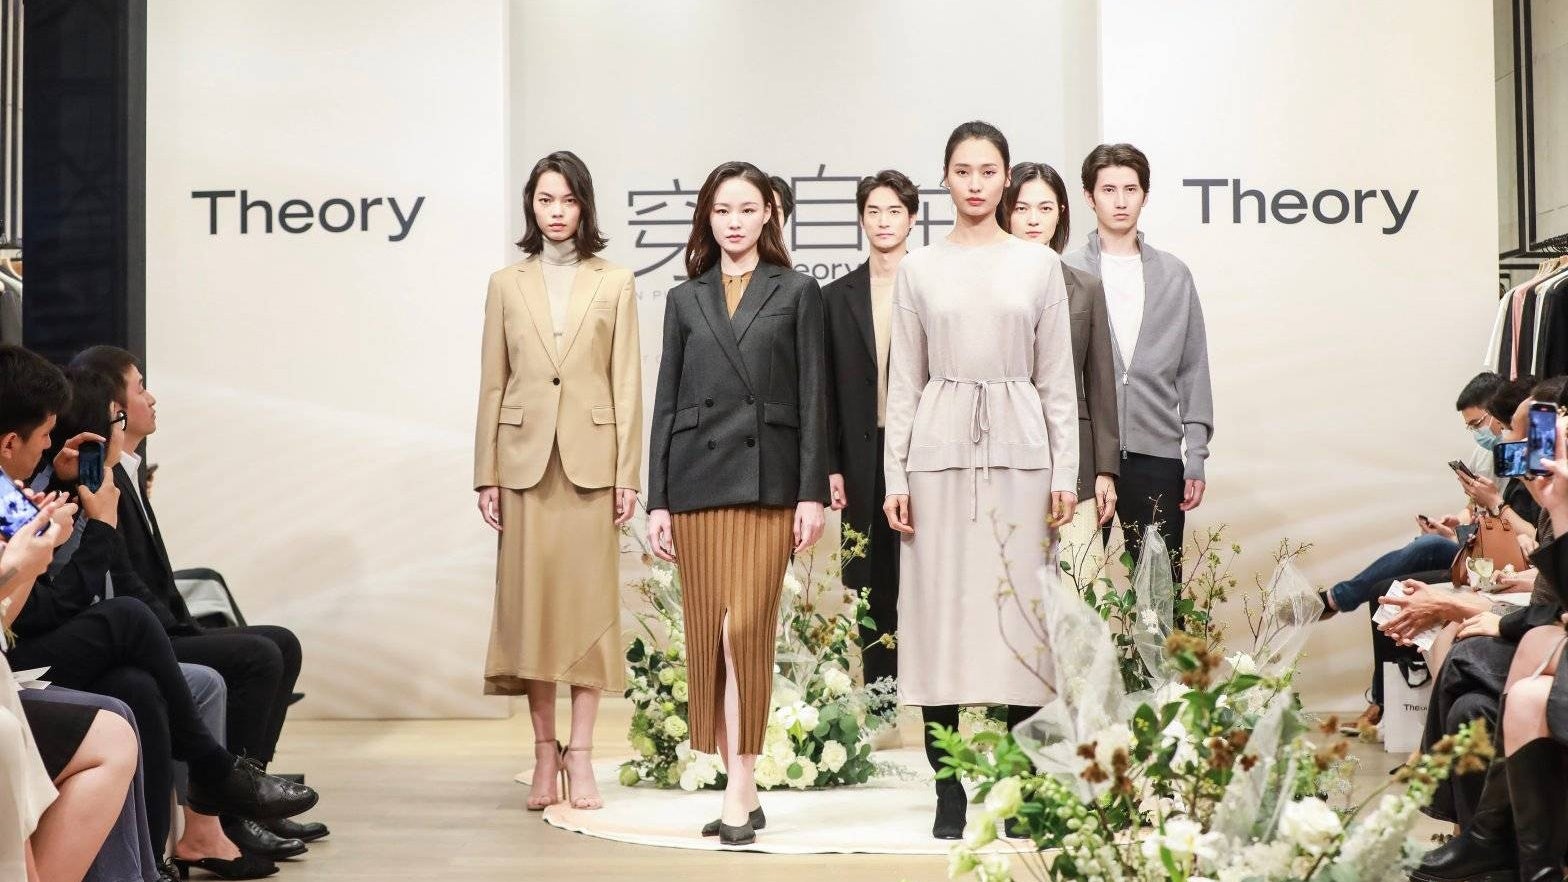 Theory is the latest fashion name accused of racism toward Asians after a consumer received an order labeled “Ching.” What will the repercussions be? Photo: Theory's Weibo